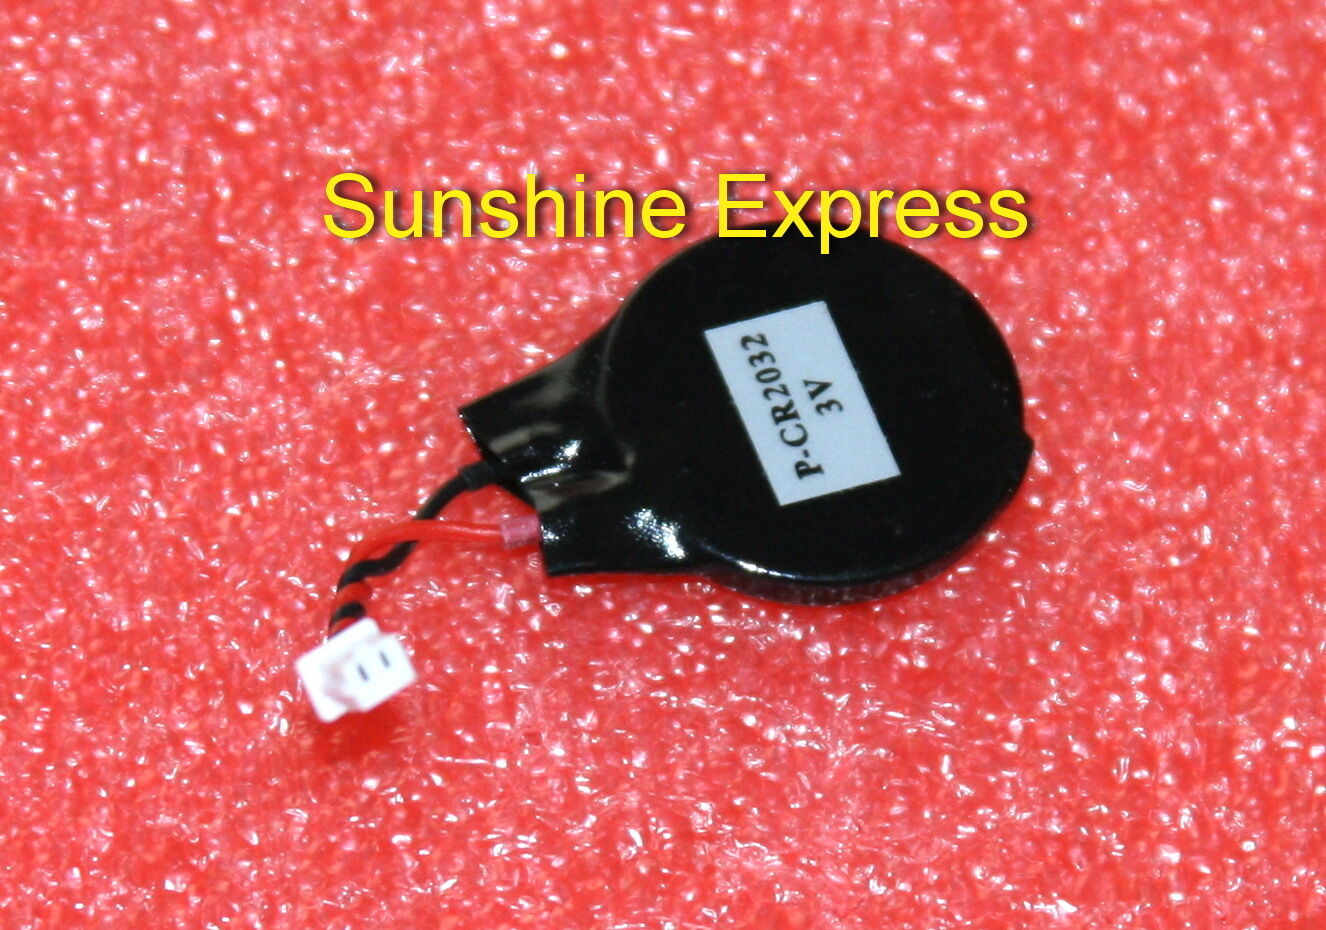 New Coin-Cell CMOS Battery P-CR2032 w/ 2-pin Connector for Alienware M11x R1 R2